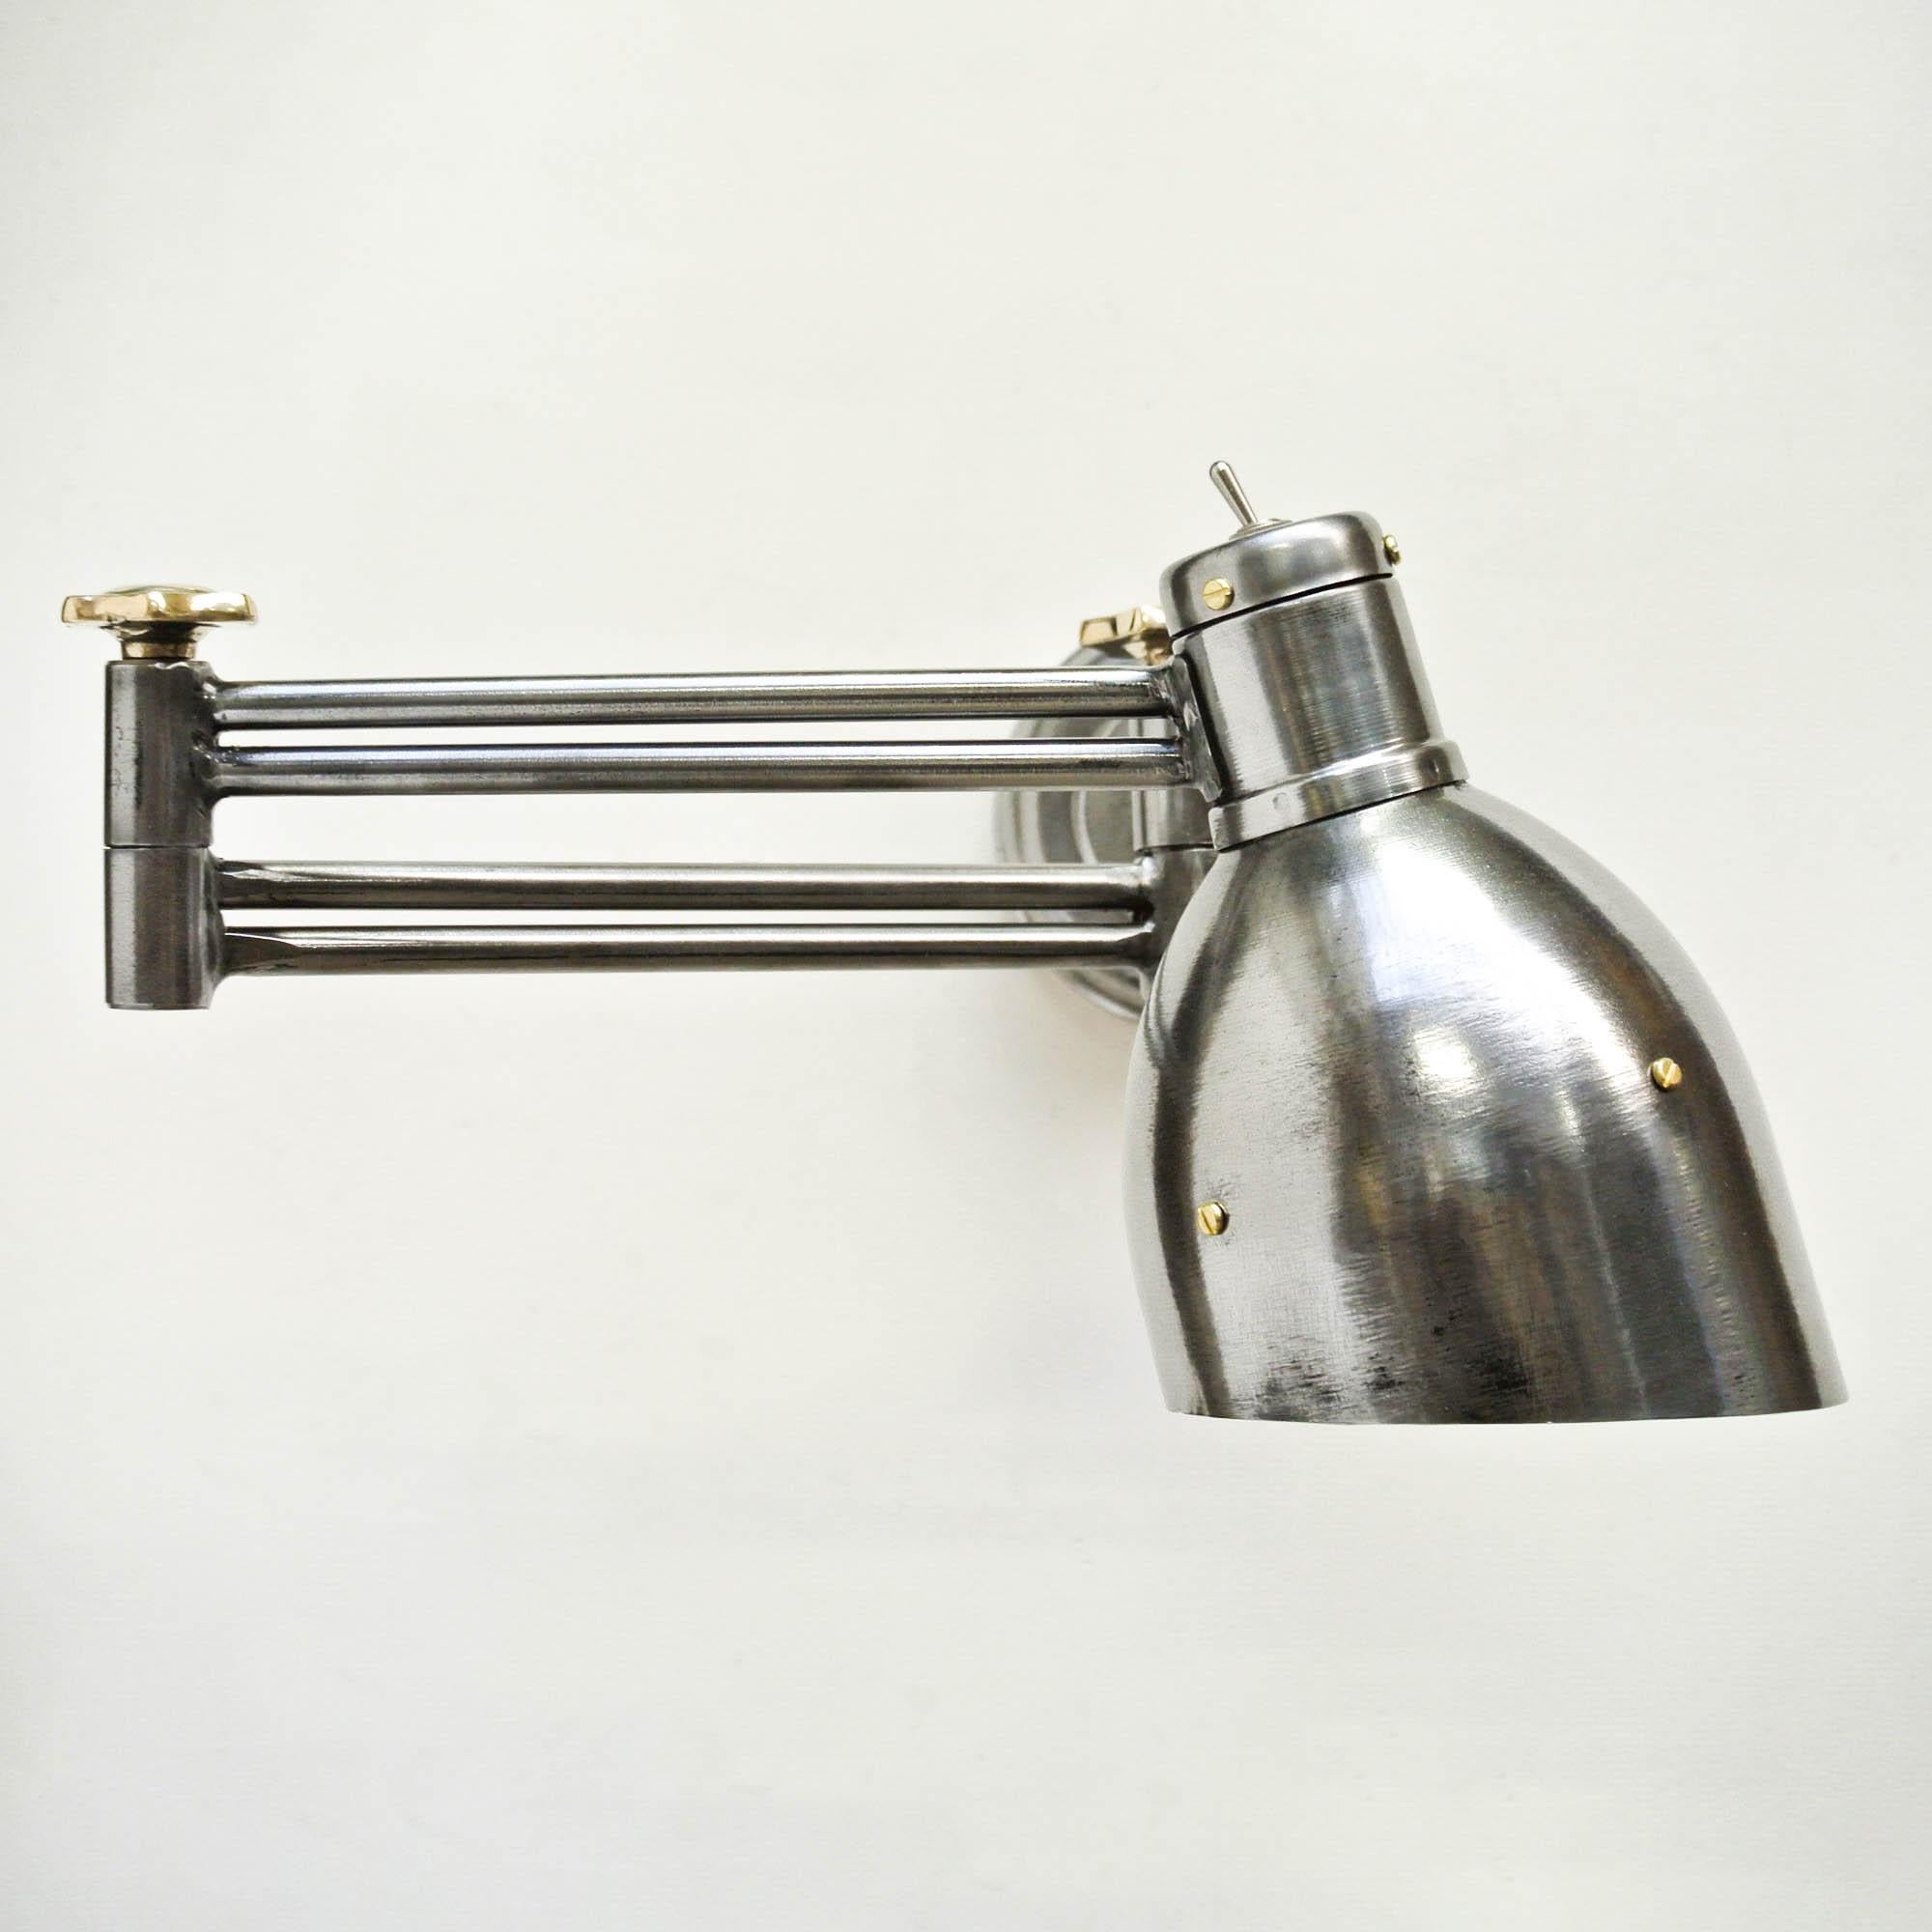 Polished Russian Deploying Lamp with Articulated Arms, Russia, circa 1950